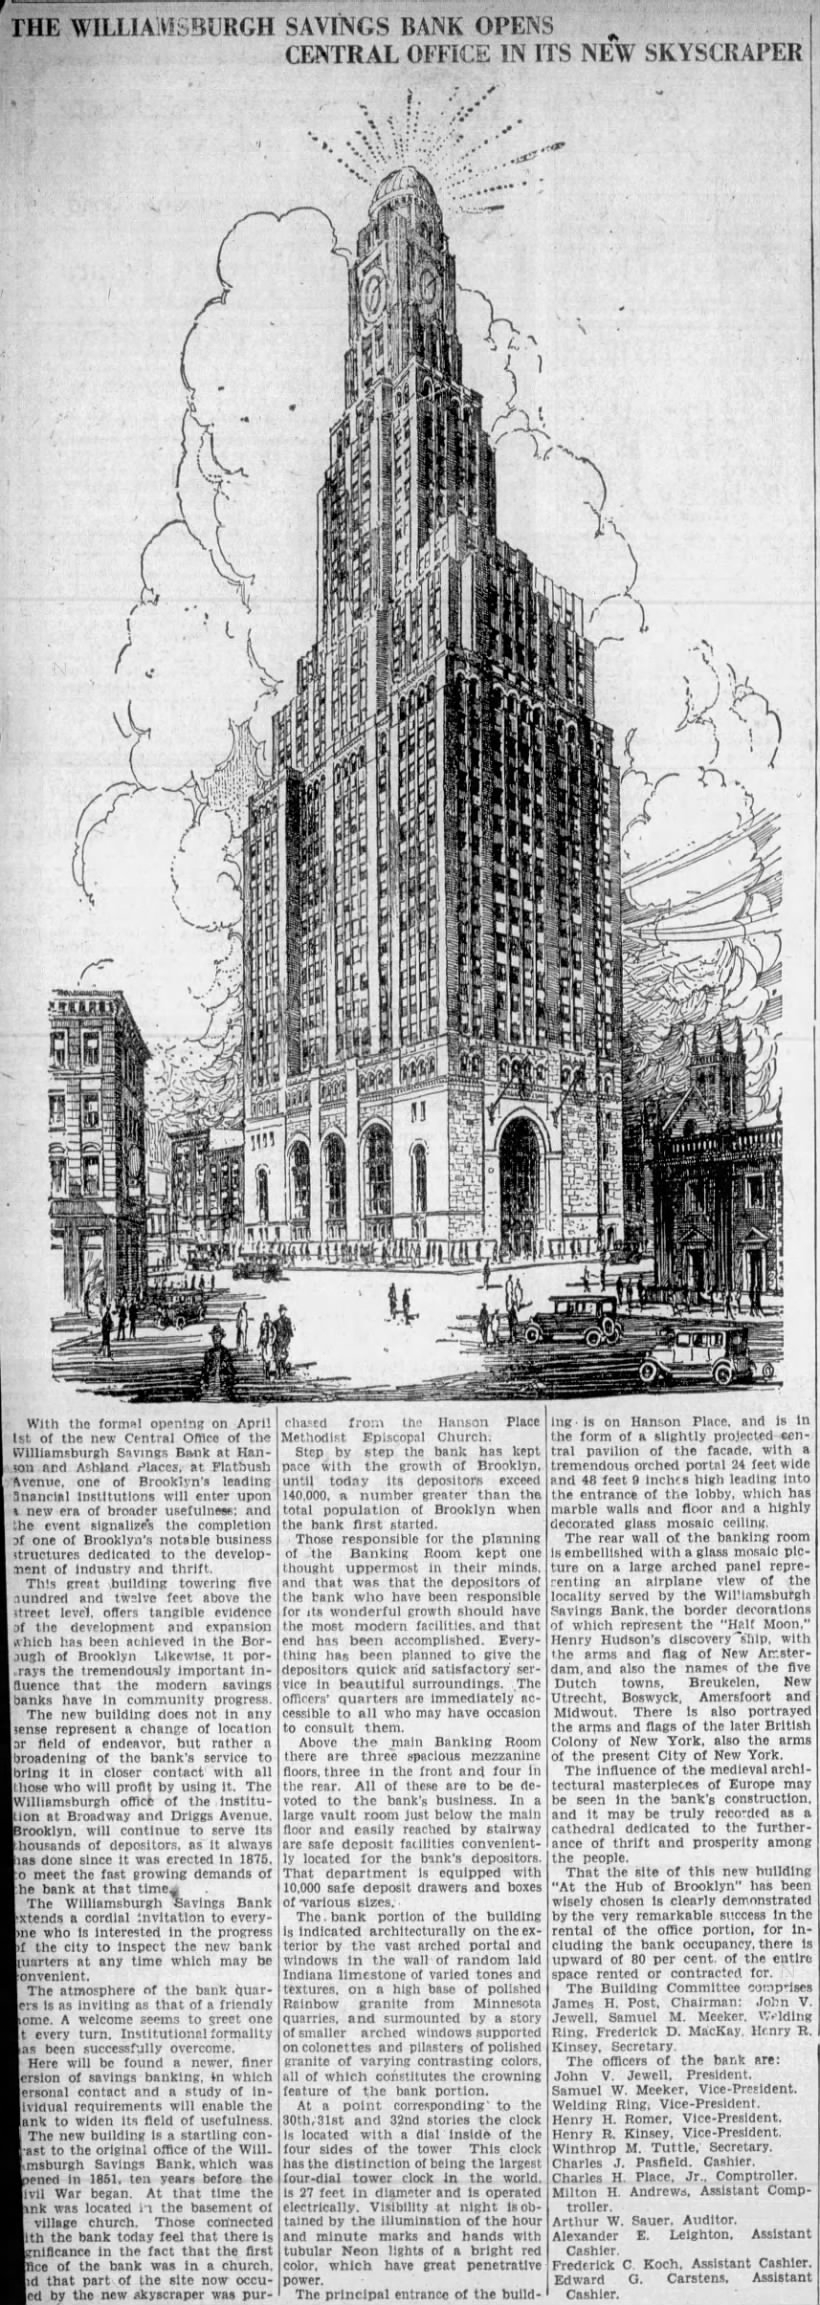 The Williamsburgh Savings Bank Opens Its Central Office in New Skyscraper